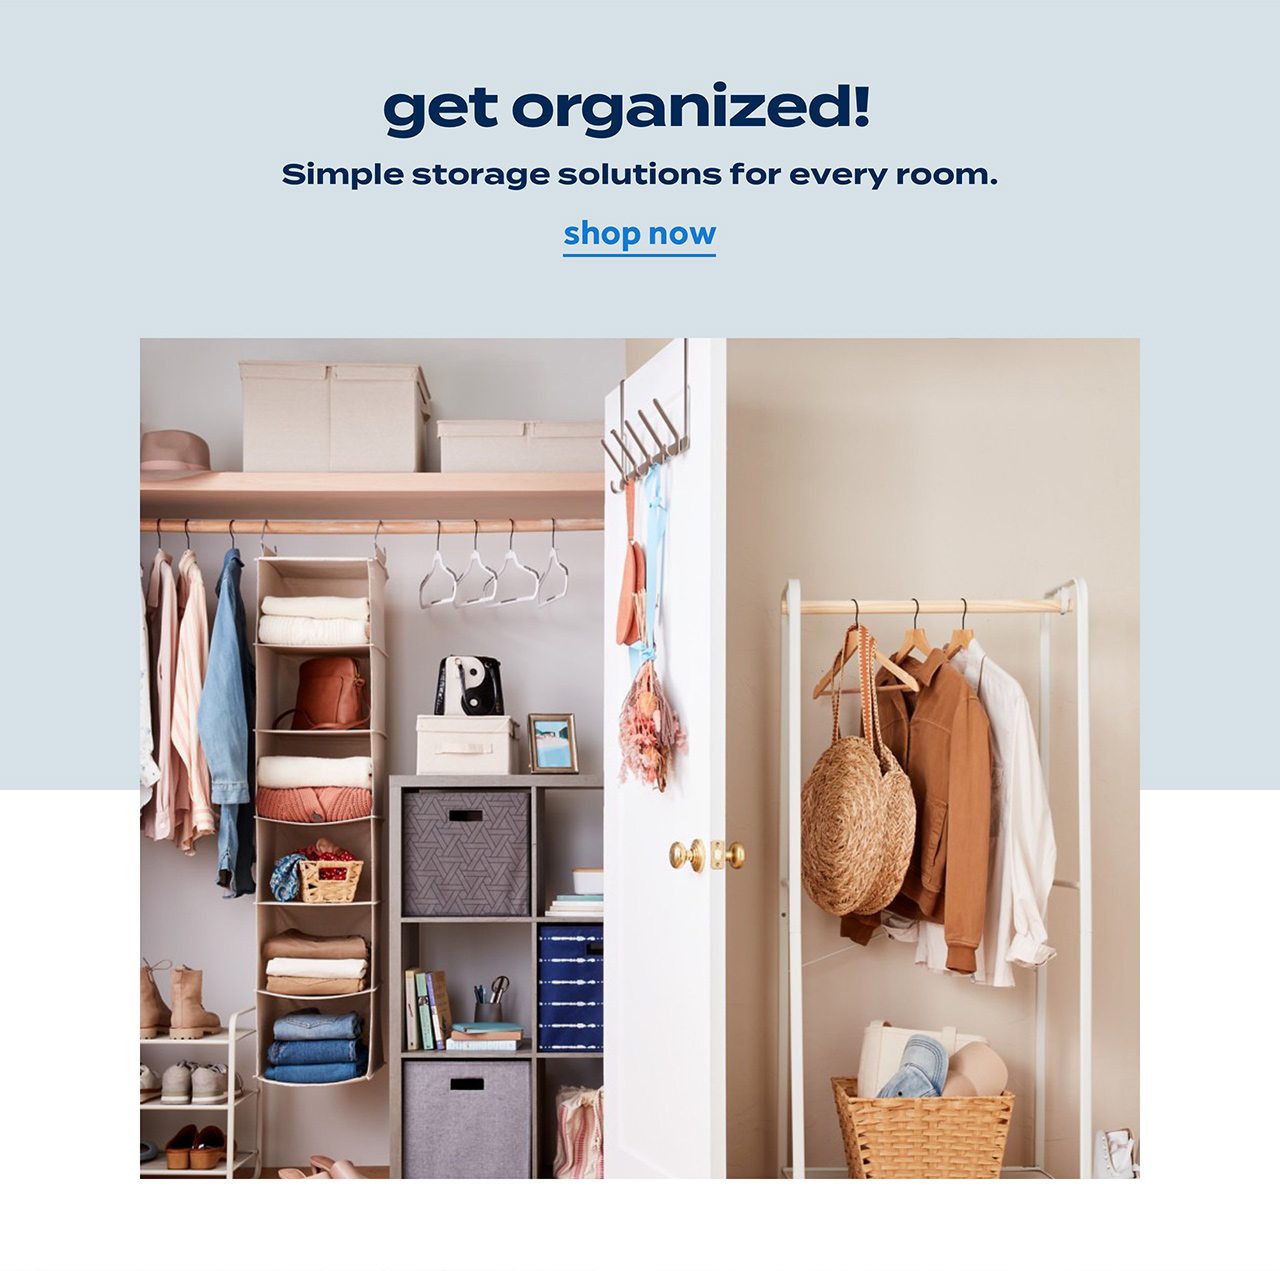 get organized! Simple storage solutions for every room | shop now